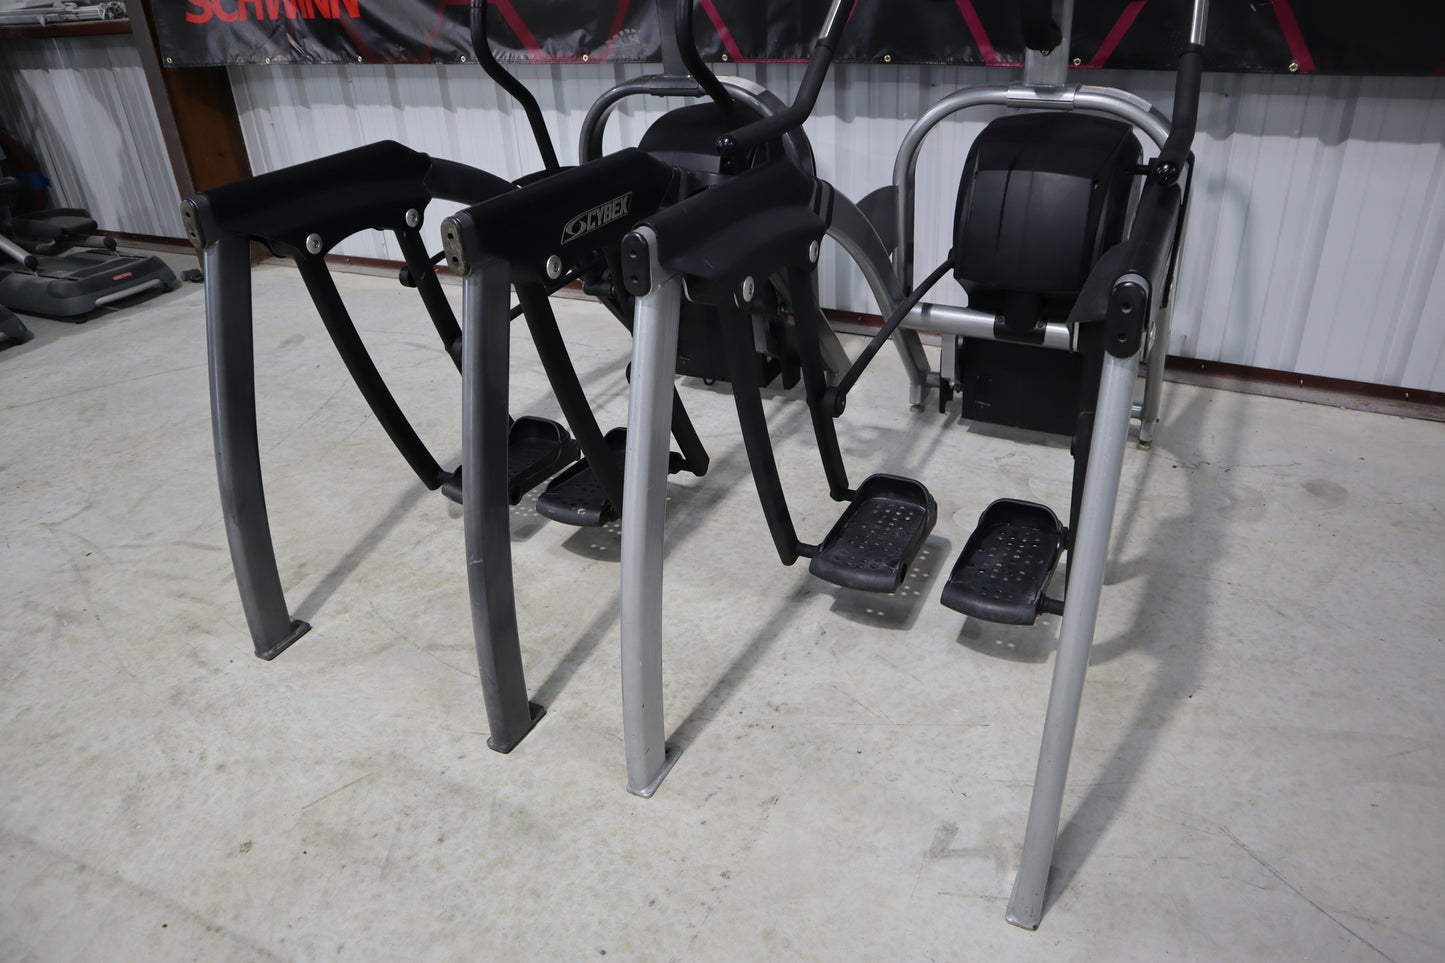 Paquete Cybex Arc Trainer * One 630A Total Body, One 620A Lower Body * (Usado)